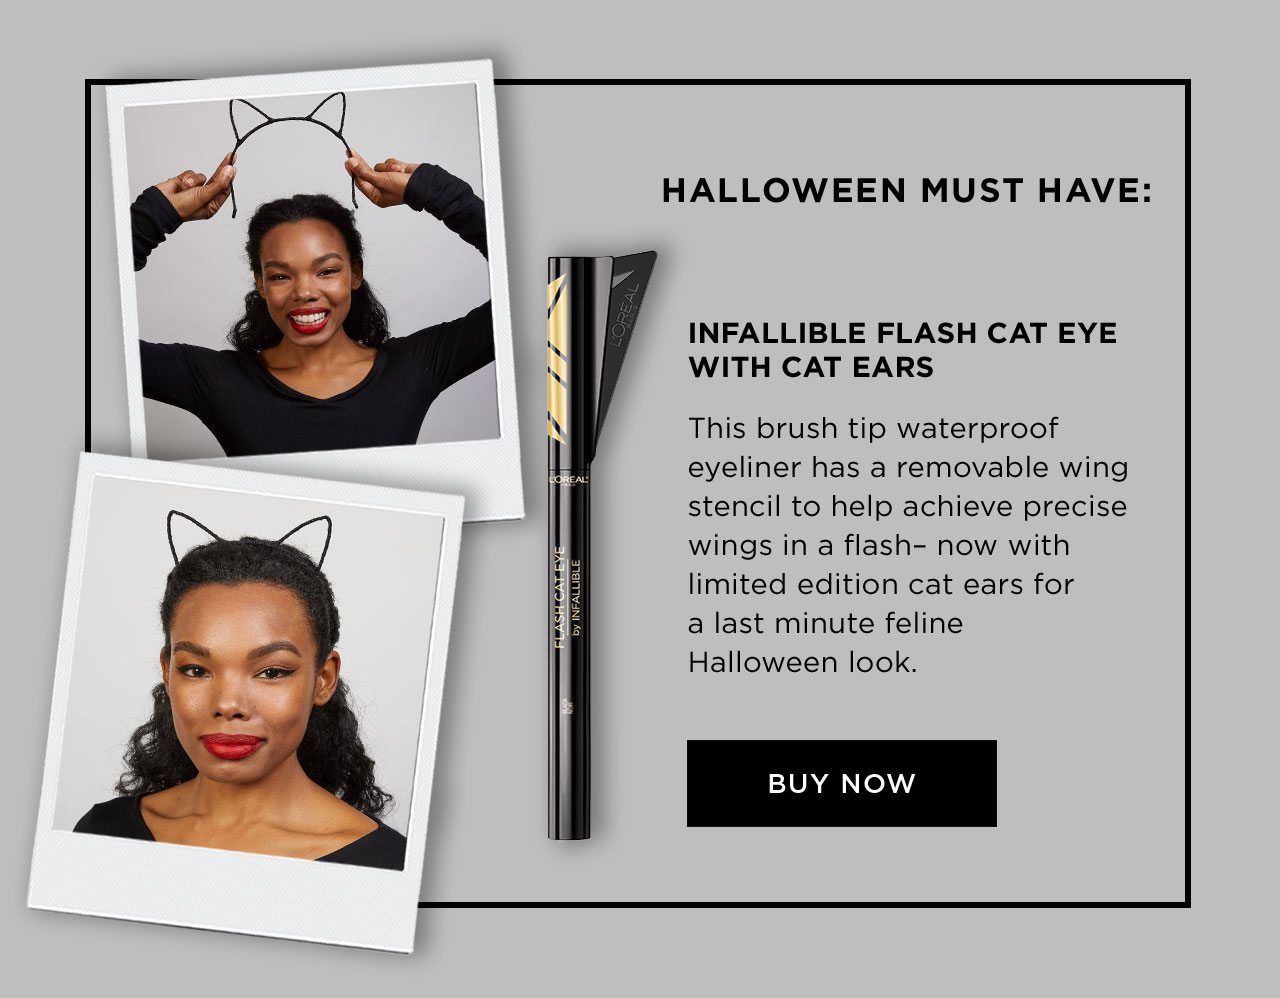 HALLOWEEN MUST HAVE: - INFALLIBLE FLASH CAT EYE WITH CAT EARS - This brush tip waterproof eyeliner has a removable wing stencil to help achieve precise wings in a flash– now with limited edition cat ears for a last minute feline Halloween look. - BUY NOW